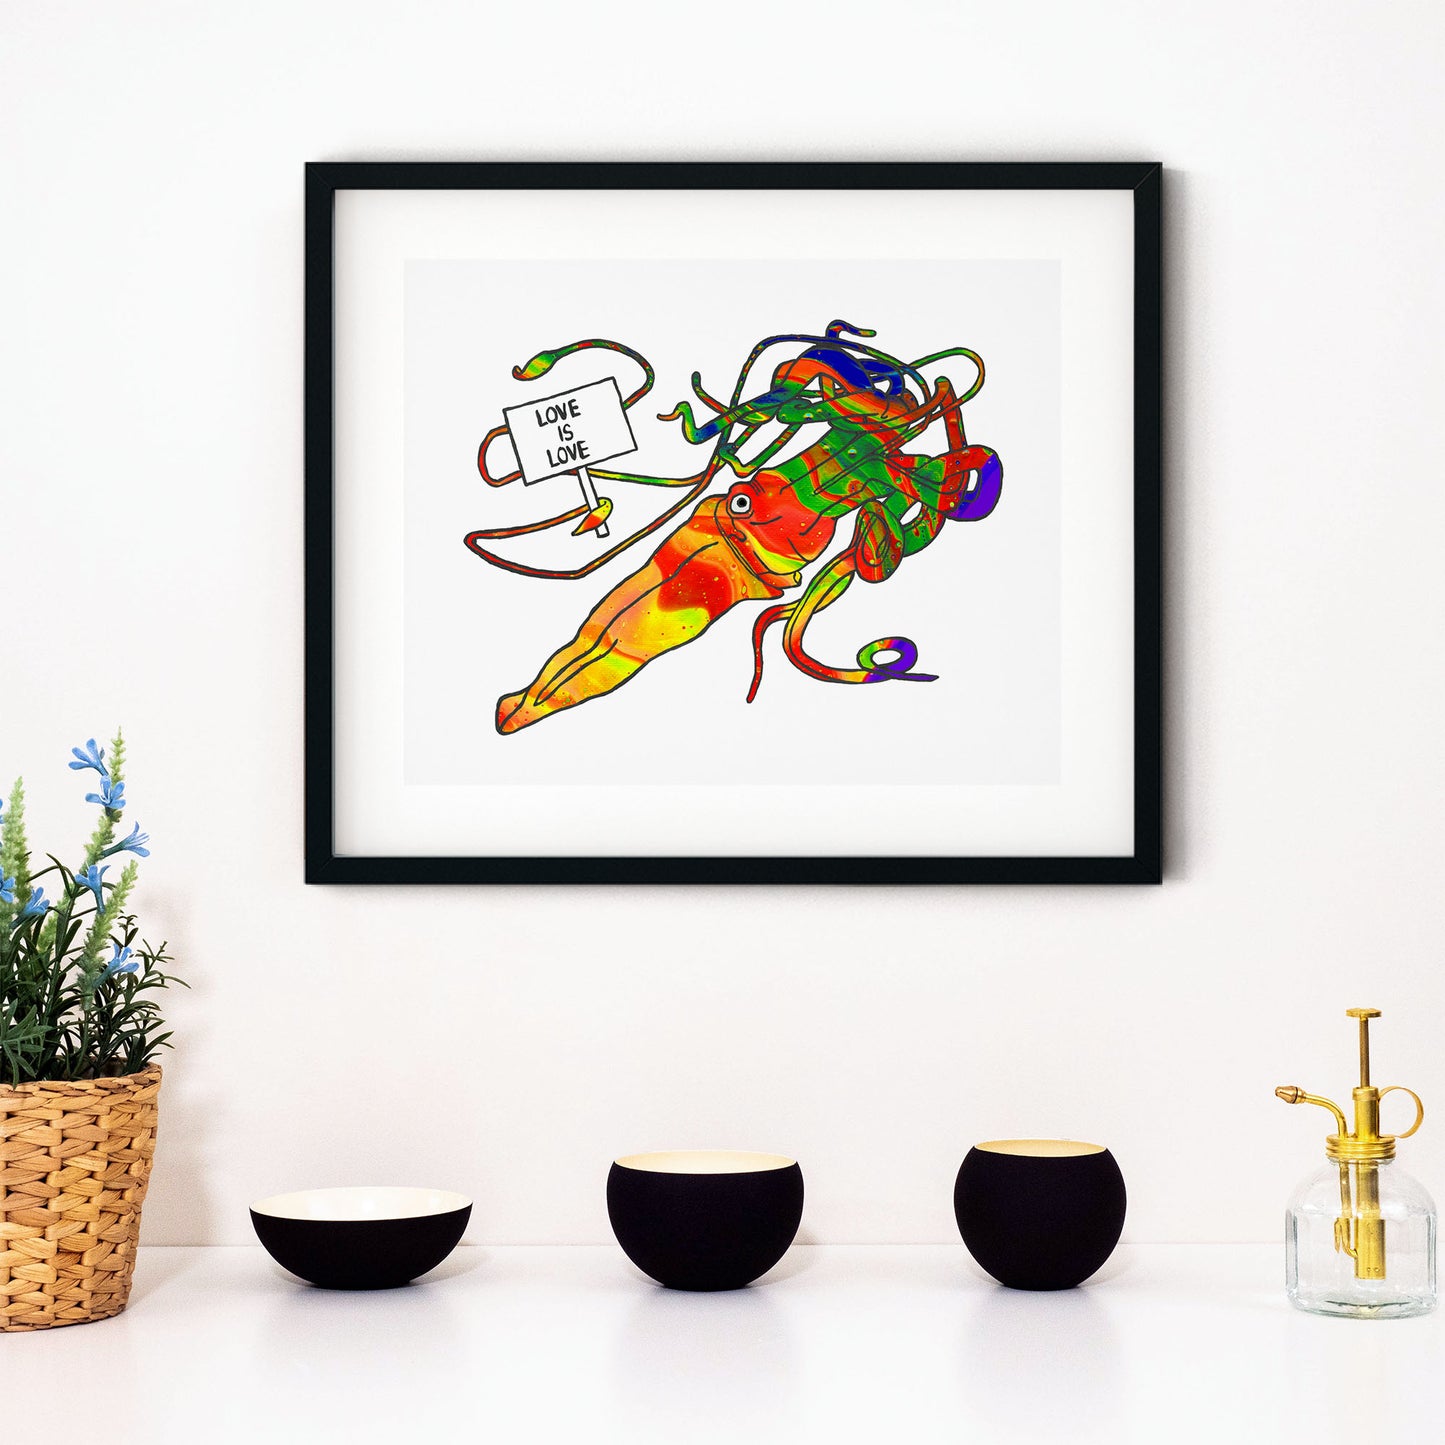 Giant squid holding 'Love Is Love' sign, framed scene - Candid Almond